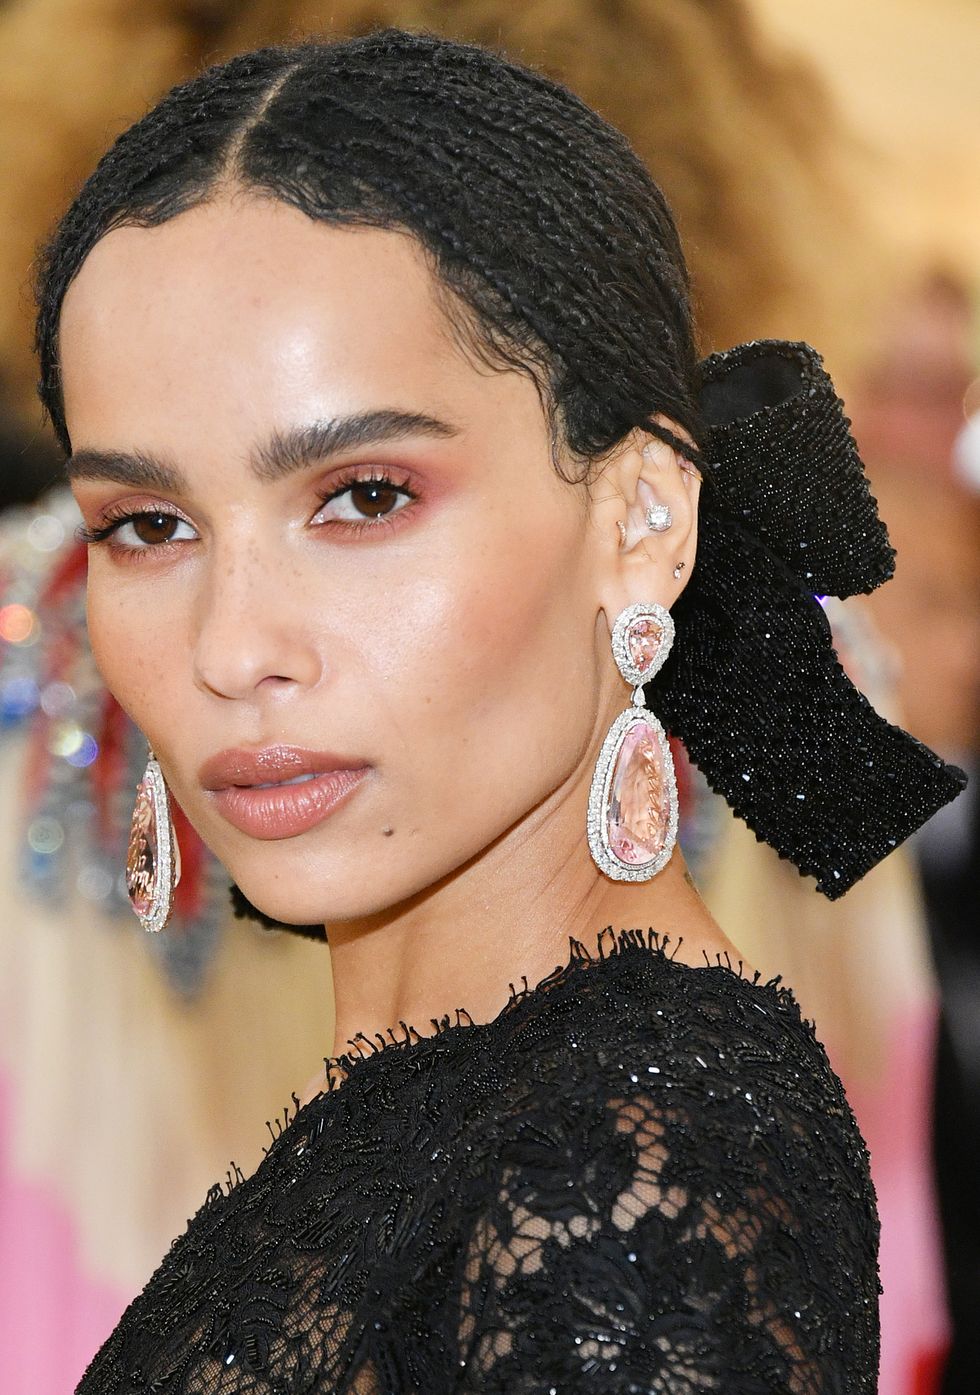 new york, ny may 07 zoe kravitz attends the heavenly bodies fashion the catholic imagination costume institute gala at the metropolitan museum of art on may 7, 2018 in new york city photo by dia dipasupilwireimage